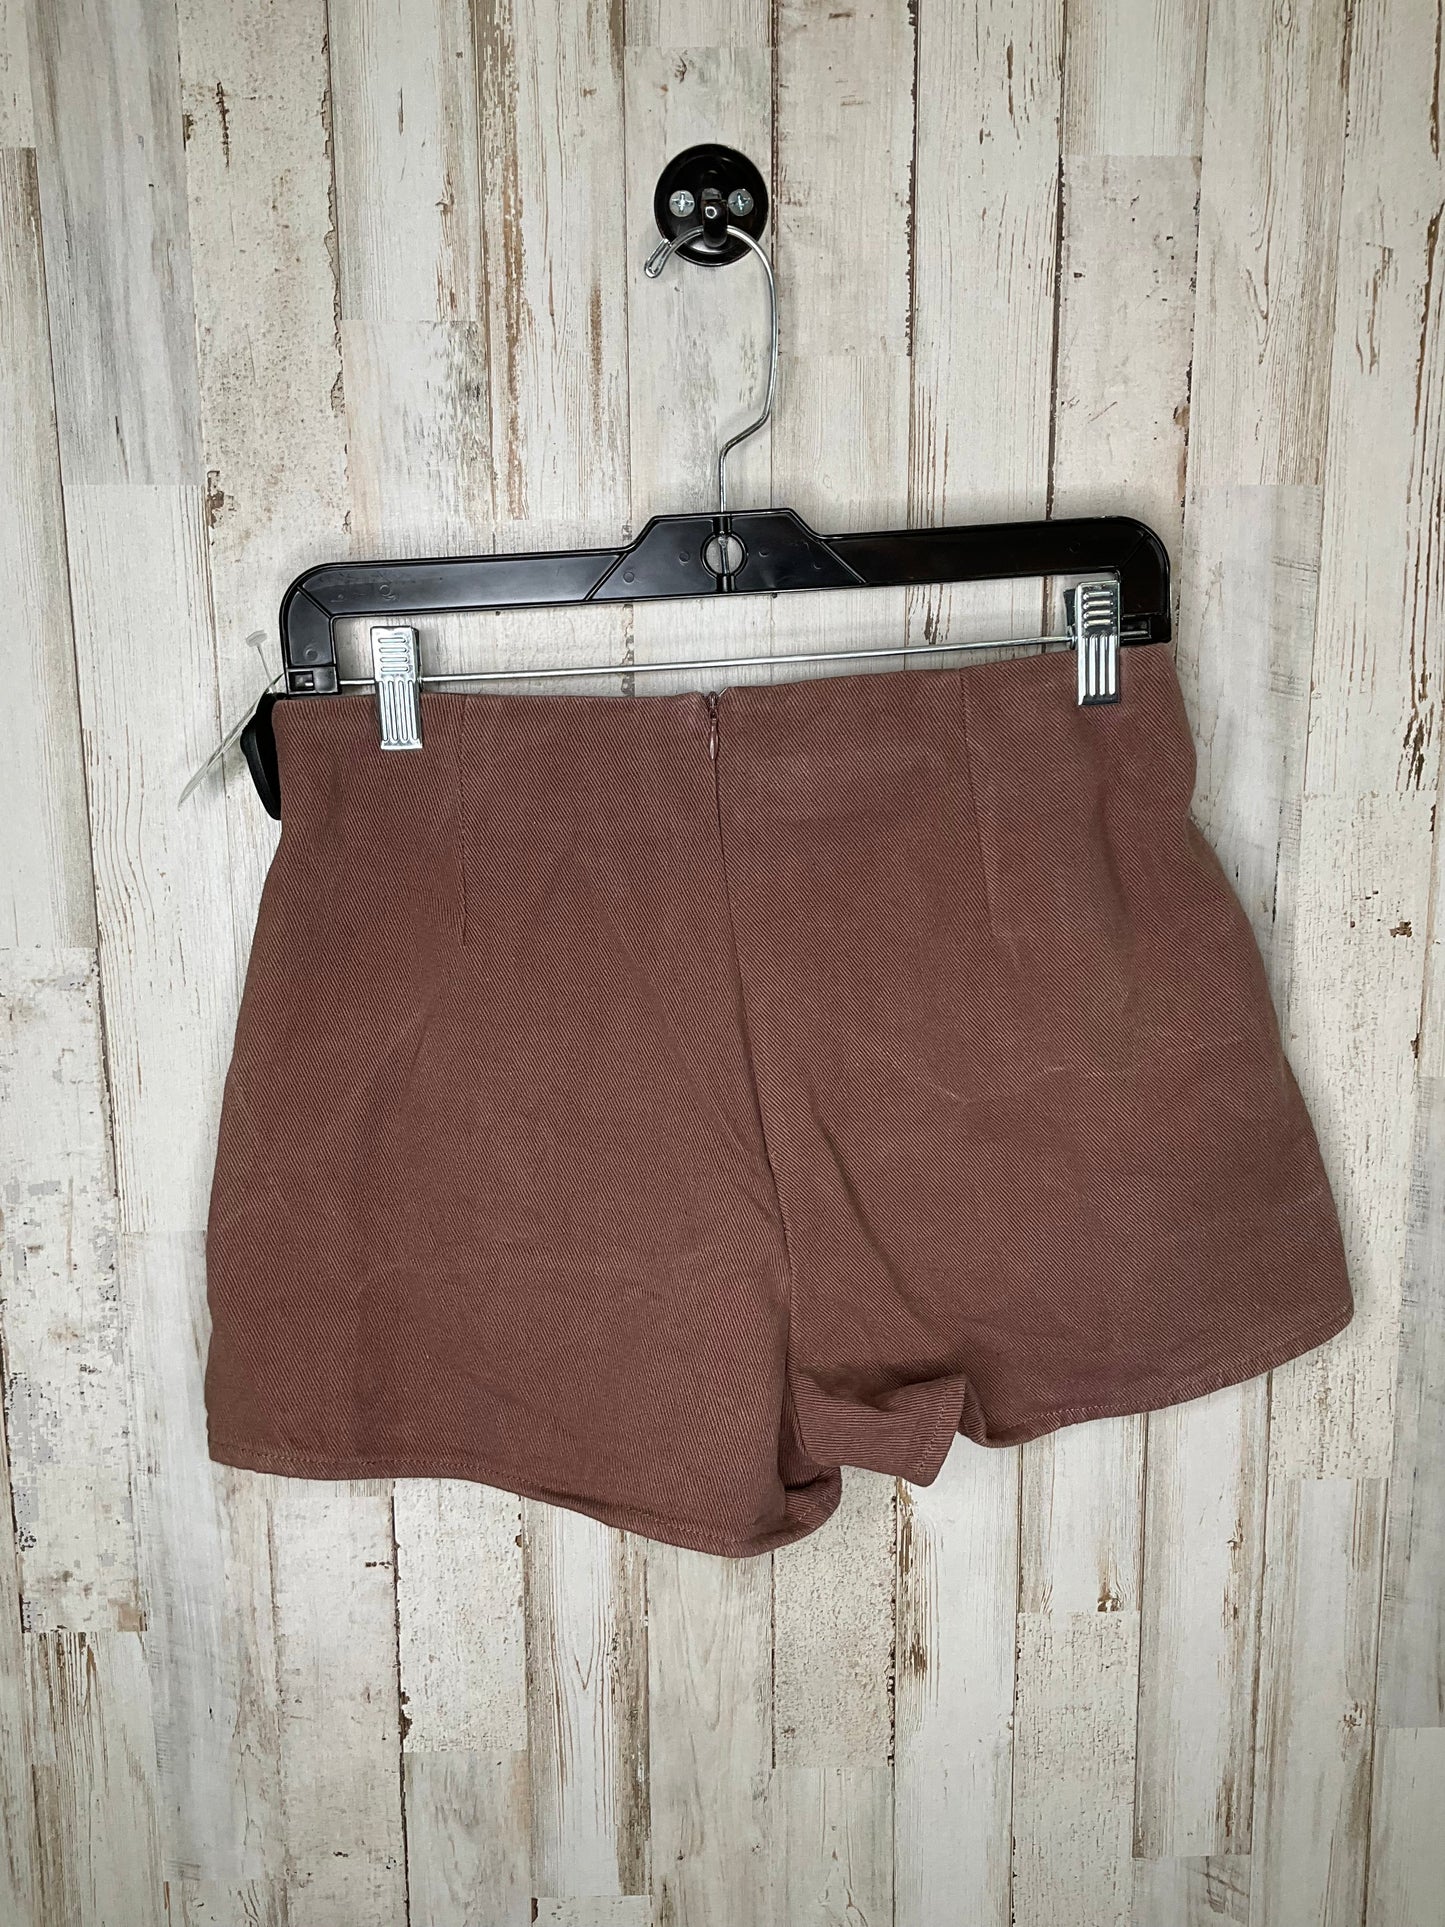 Skirt Mini & Short By Altard State  Size: 8